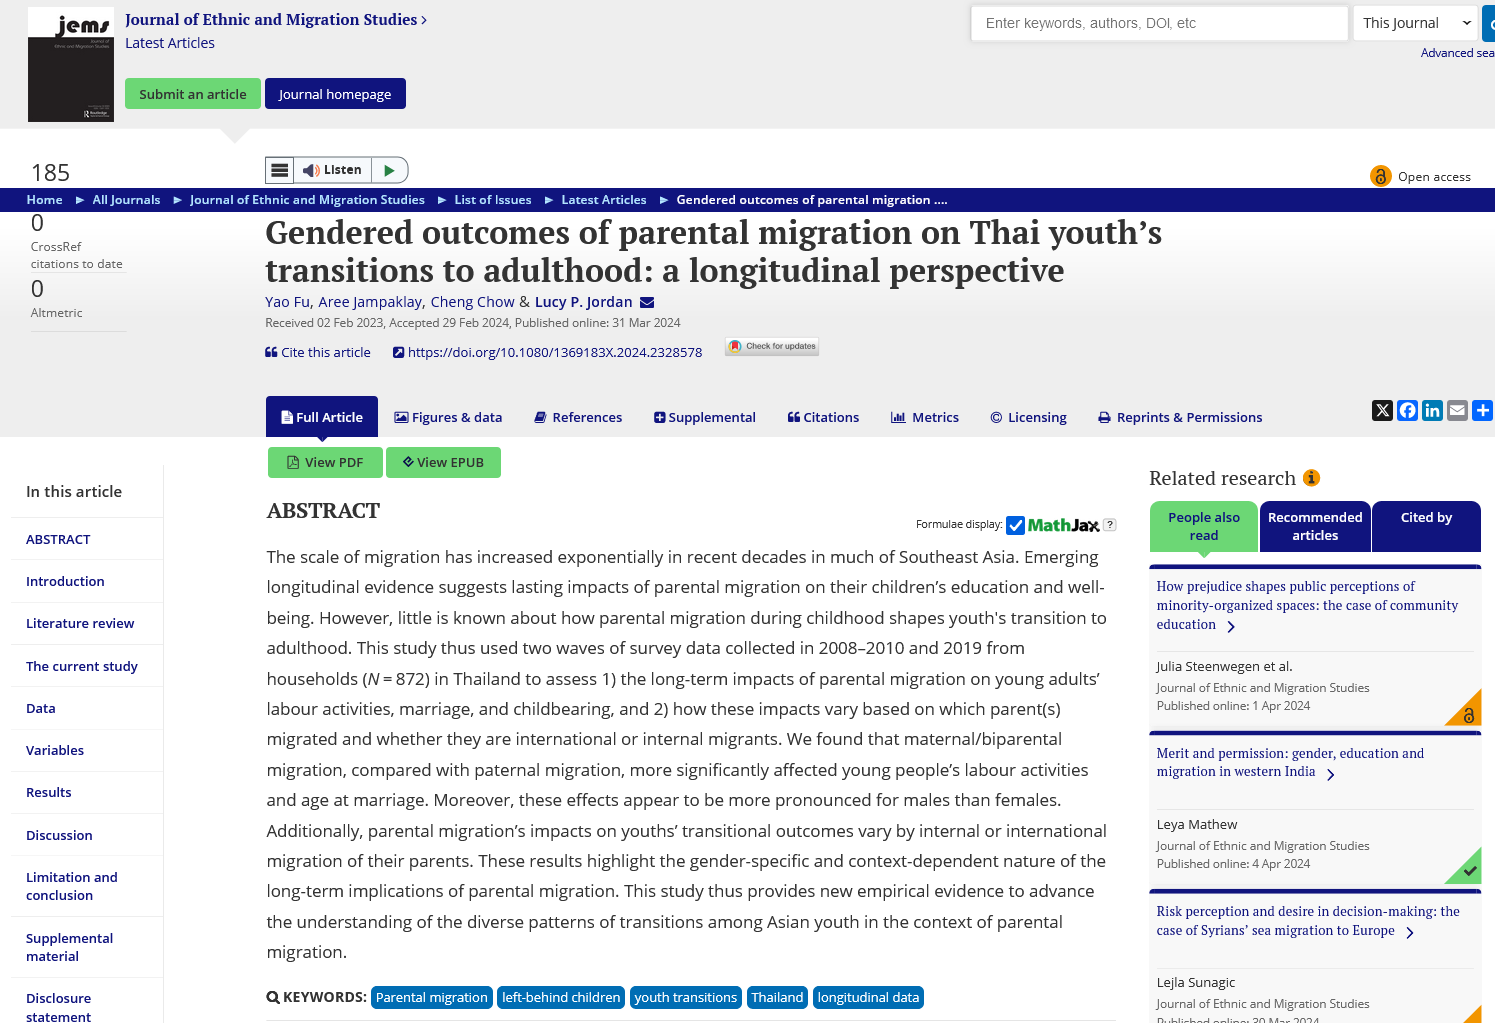 Gendered outcomes of parental migration on Thai youth’s transitions to adulthood: a longitudinal perspective